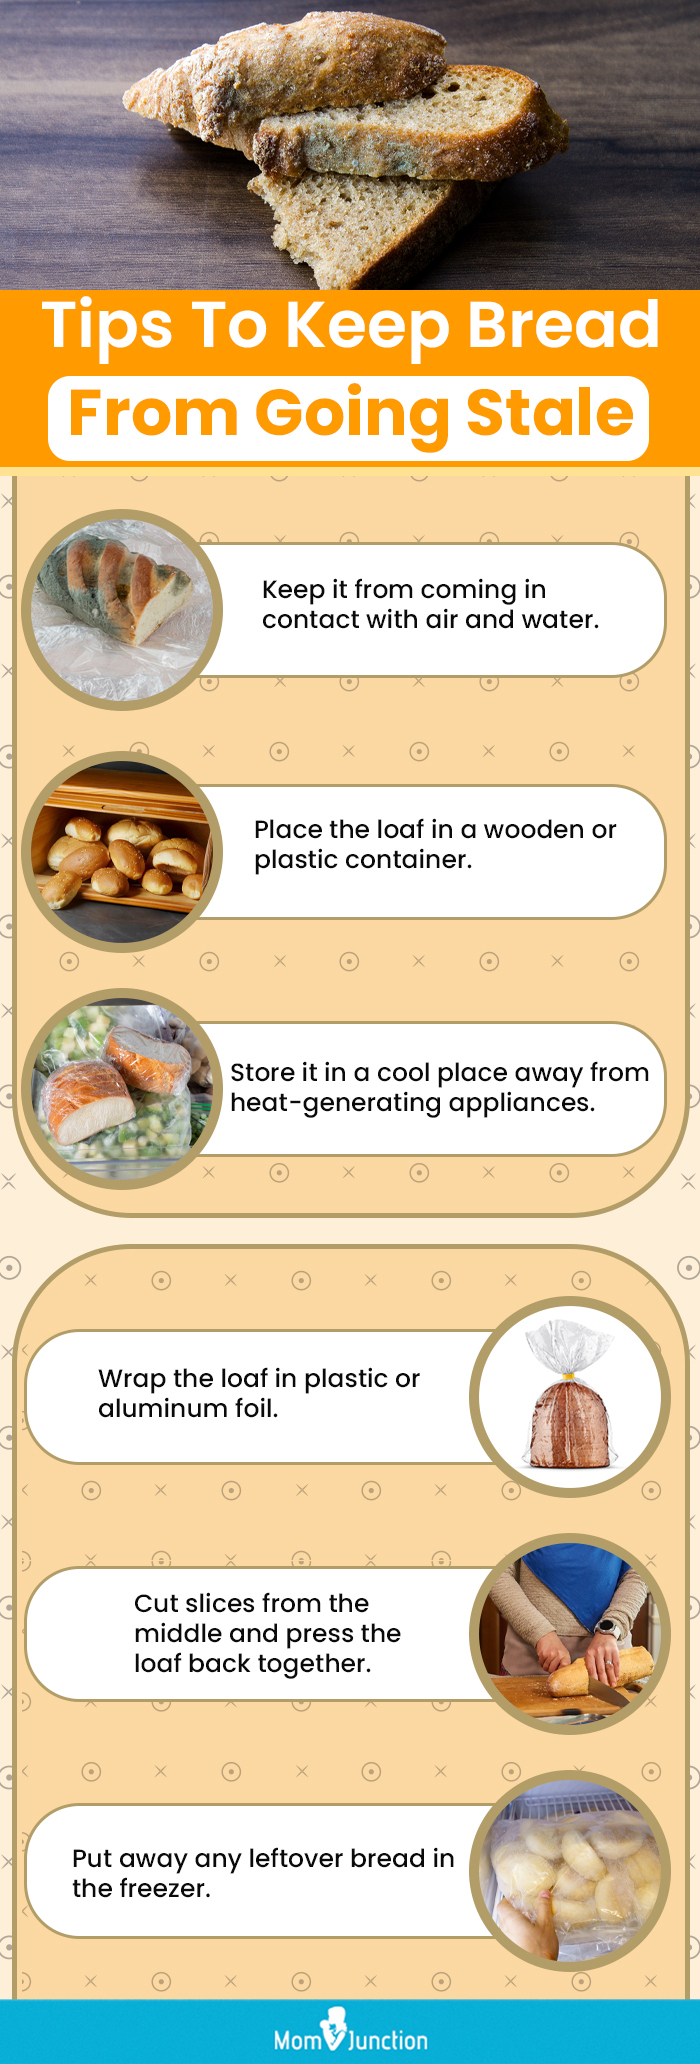 Tips To Keep Bread From Going Stale (infographic)